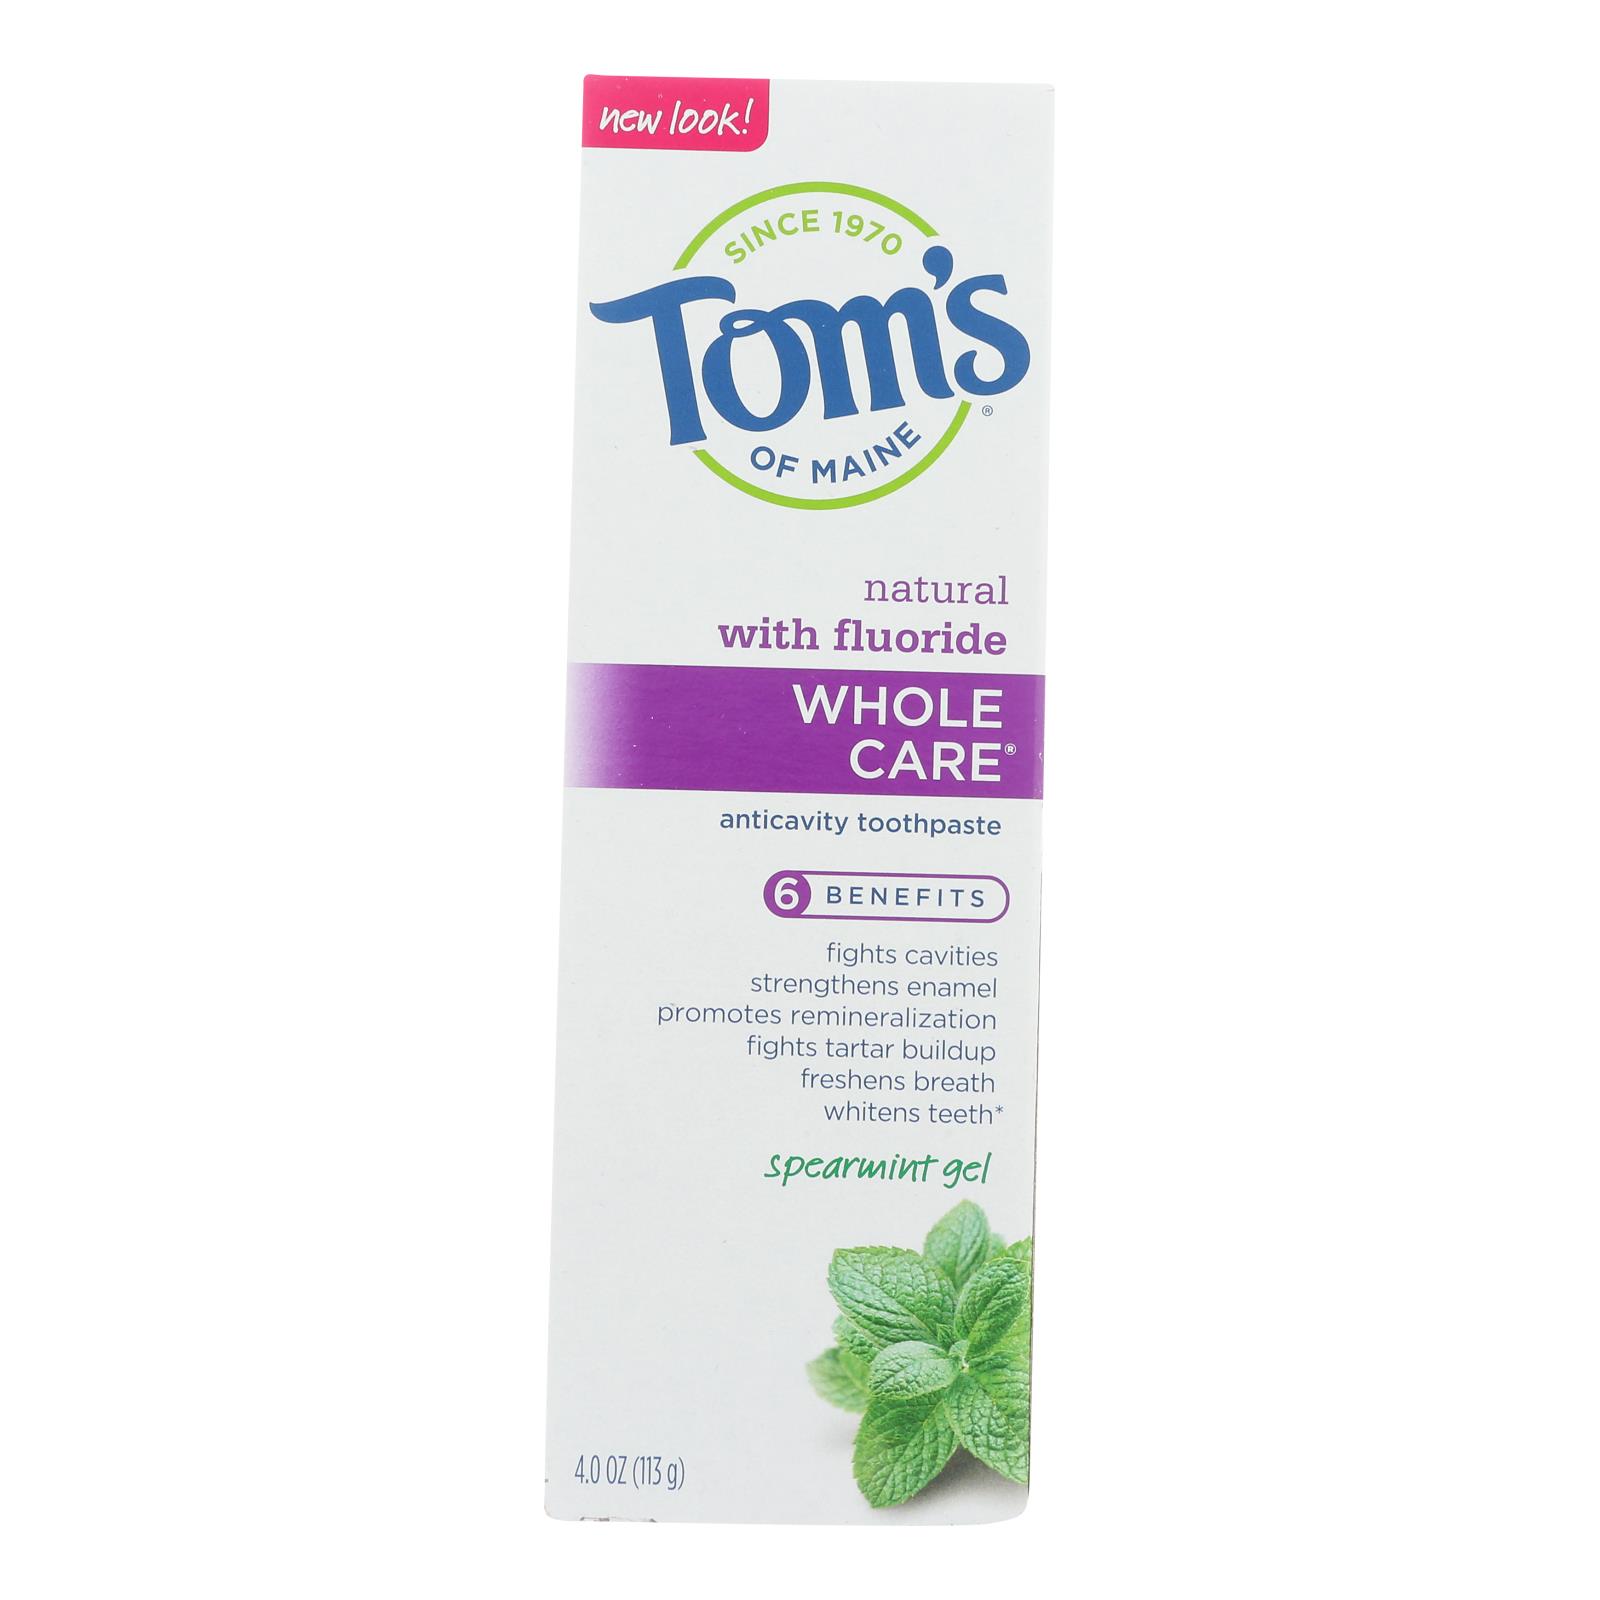 Tom's Of Maine - Tp Gel Whole Care Spearmint - Case of 6 - 4 OZ